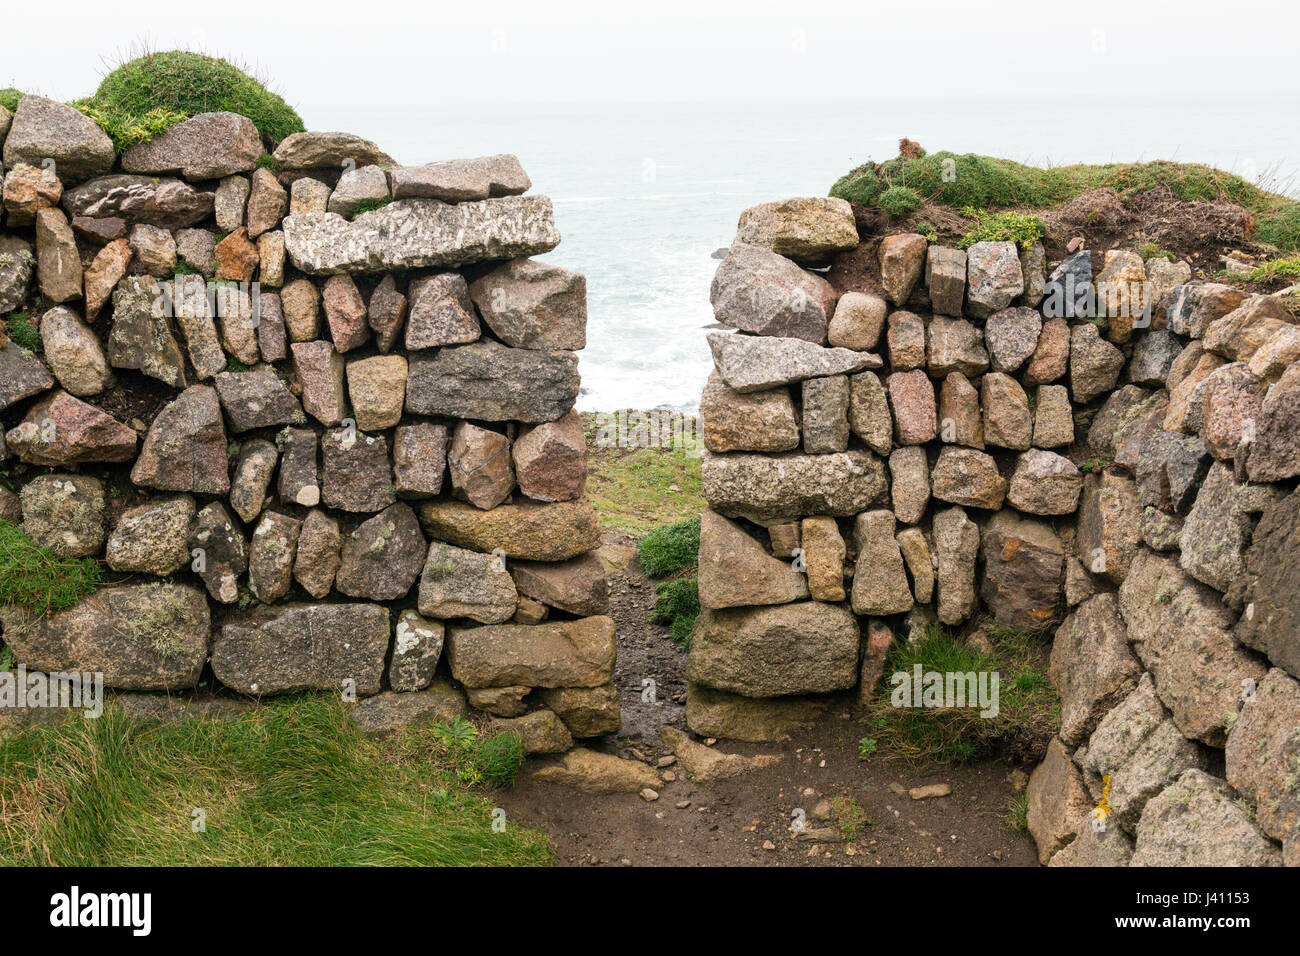 [Image: a-squeeze-stile-in-a-dry-stone-wall-buil...J41153.jpg]